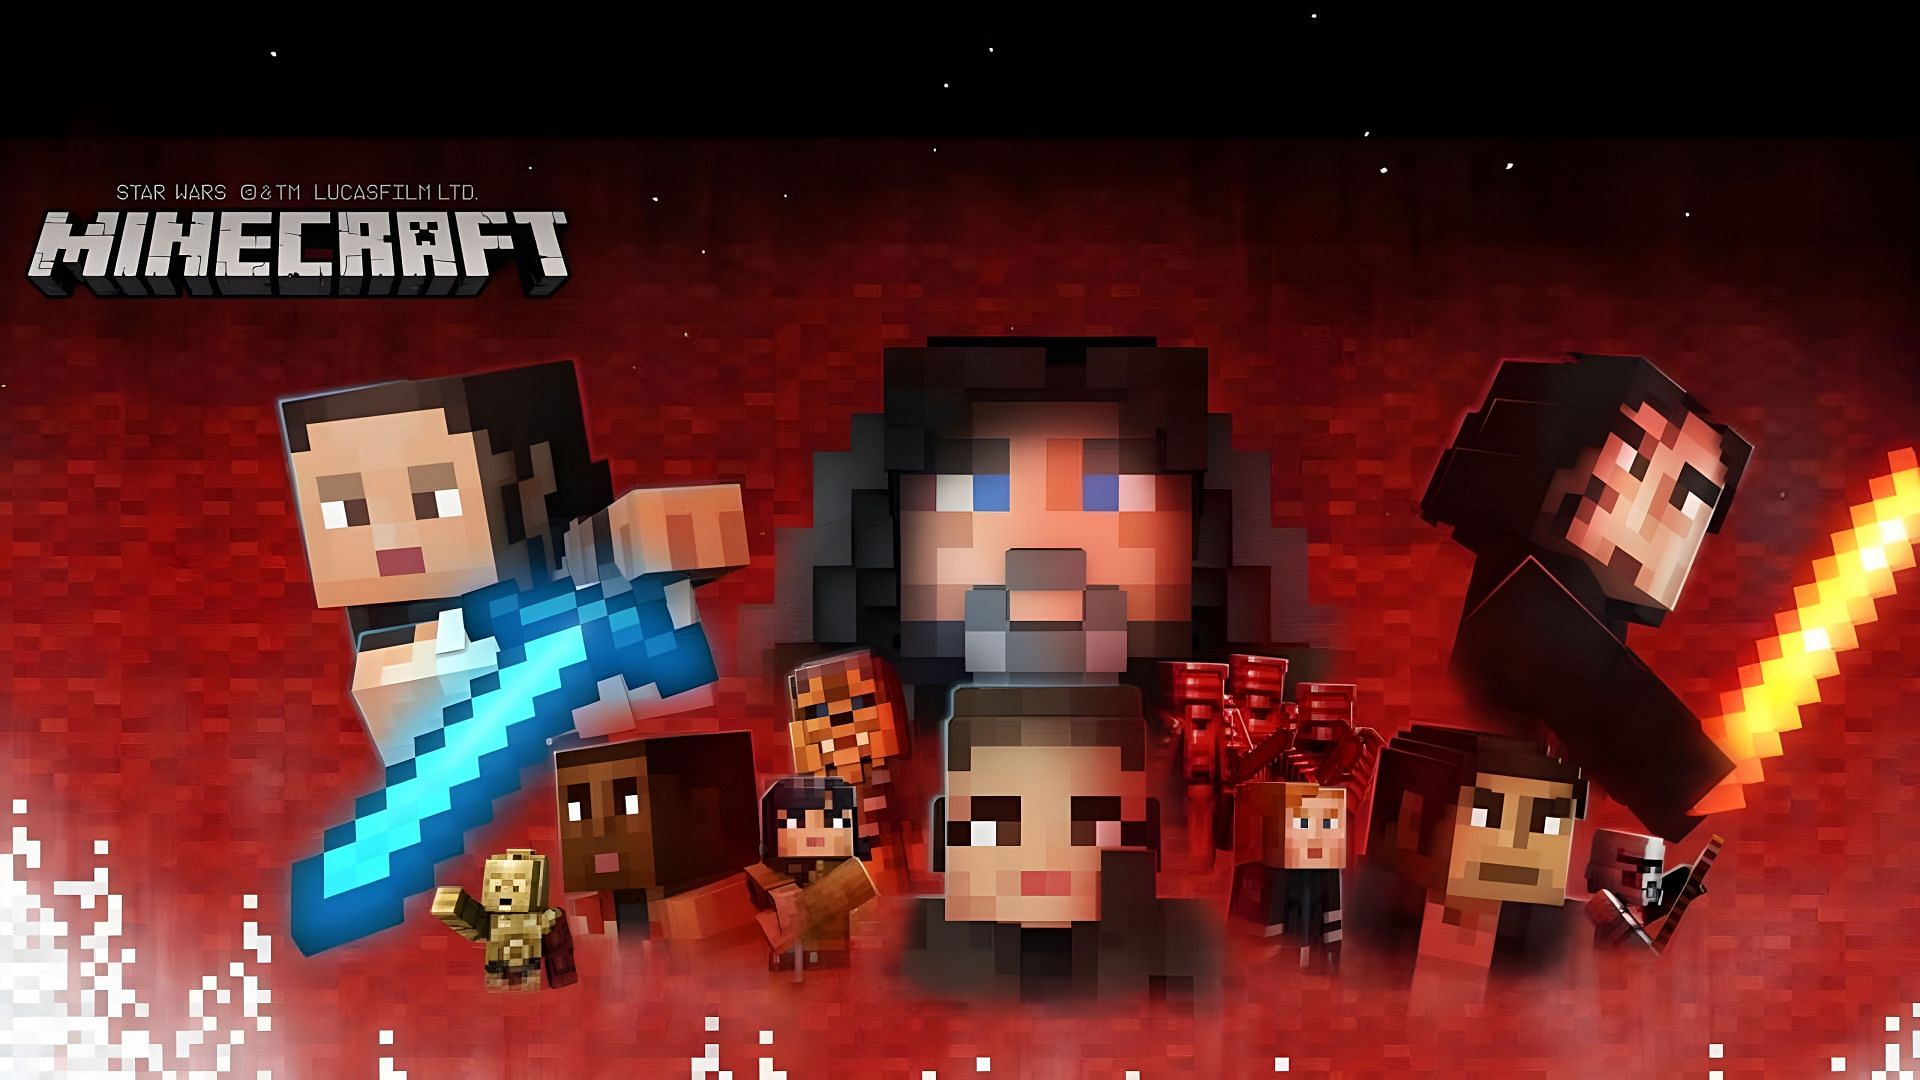 Star Wars skins can be very cool in any game (Image via Minecraft.net)